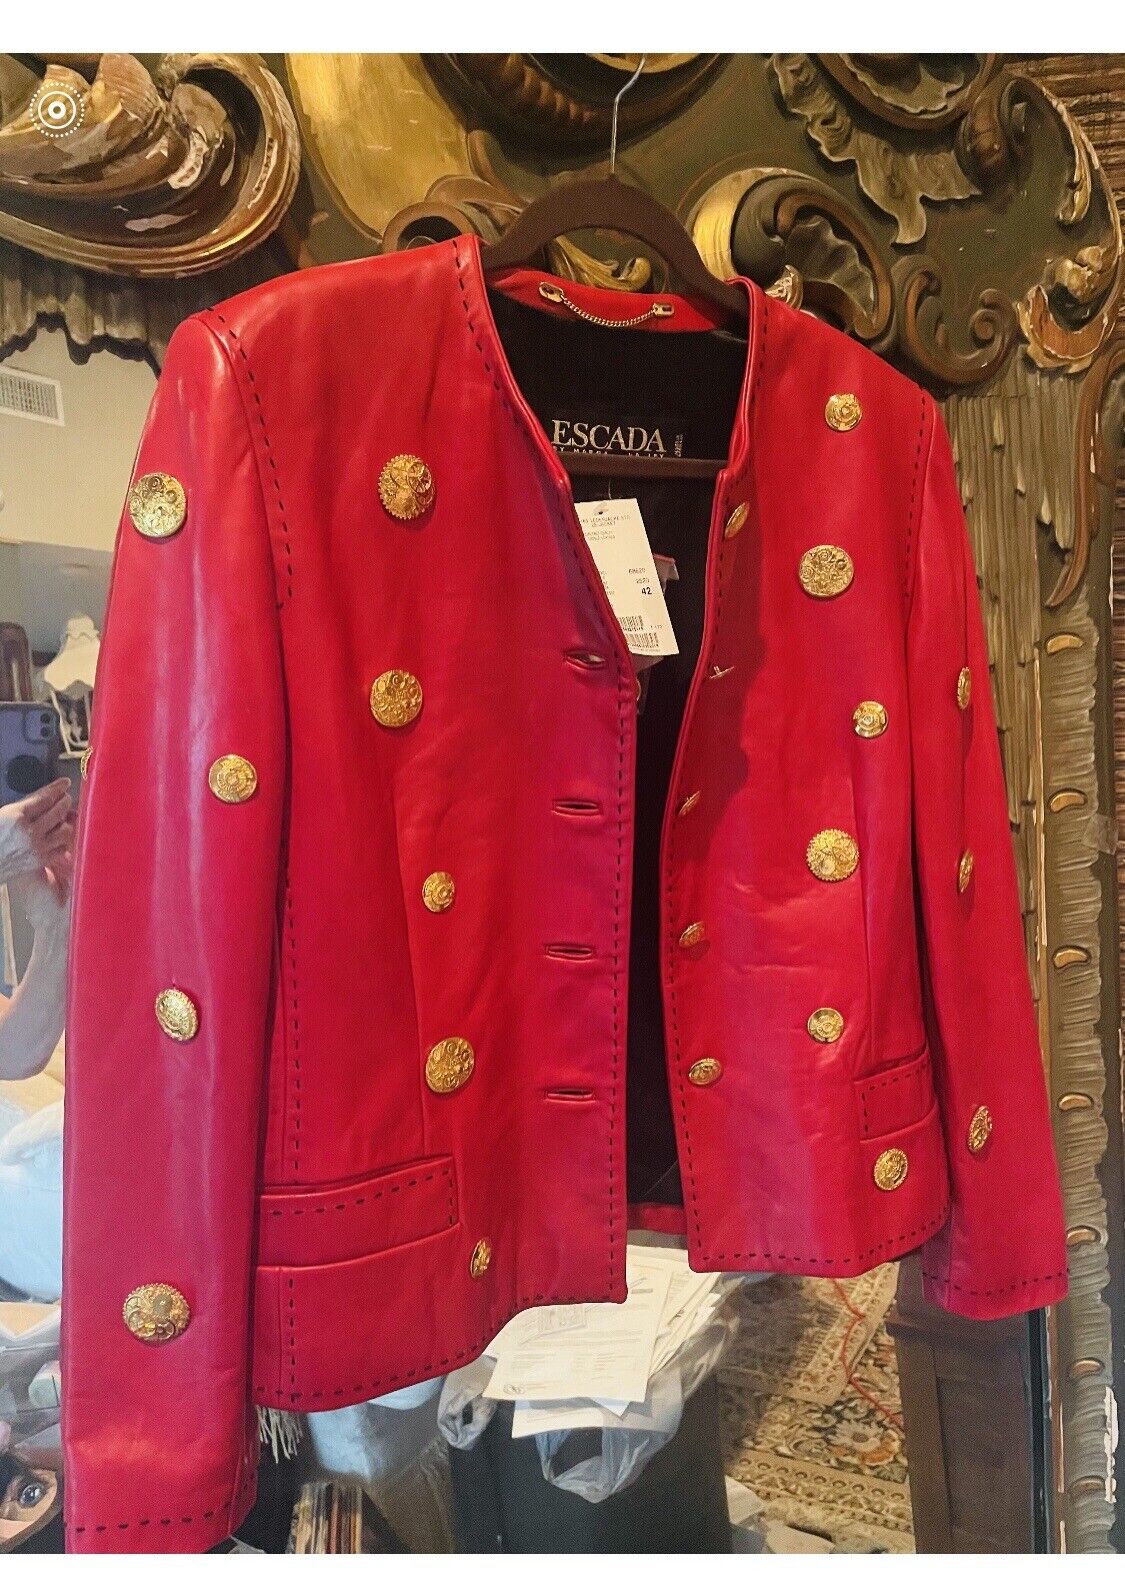 NWT Escada Women Mob Wife Red Leather Jacket - Gold Medallions 90’s Org $1500